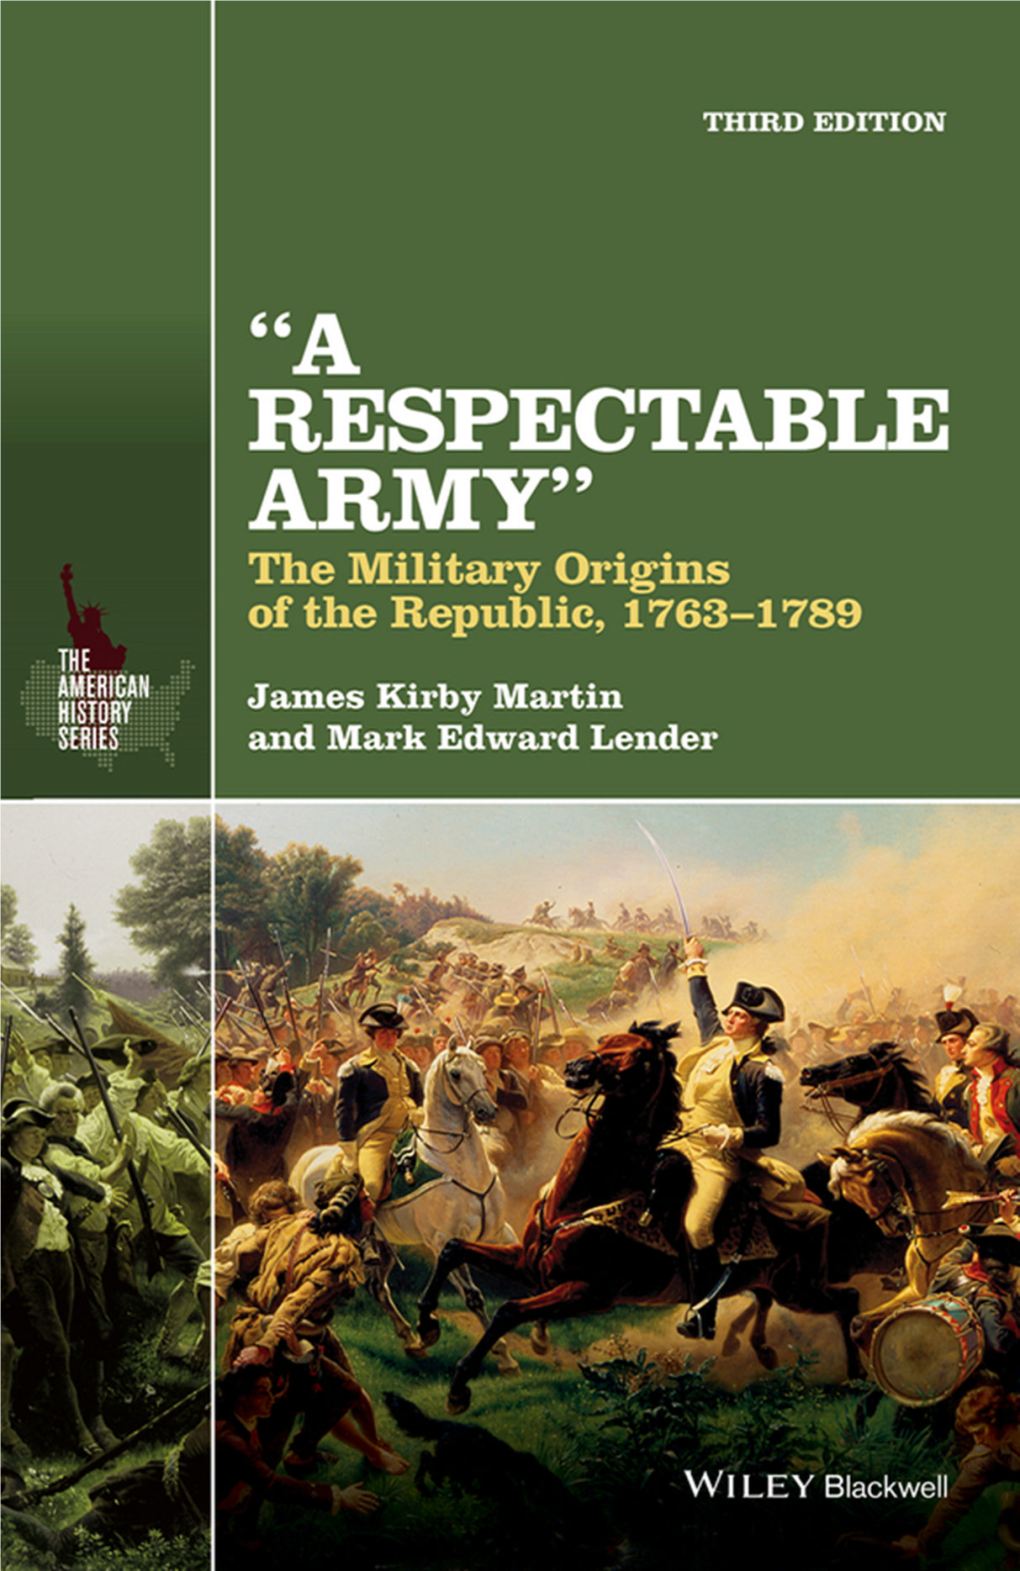 A Respectable Army” the American History Series